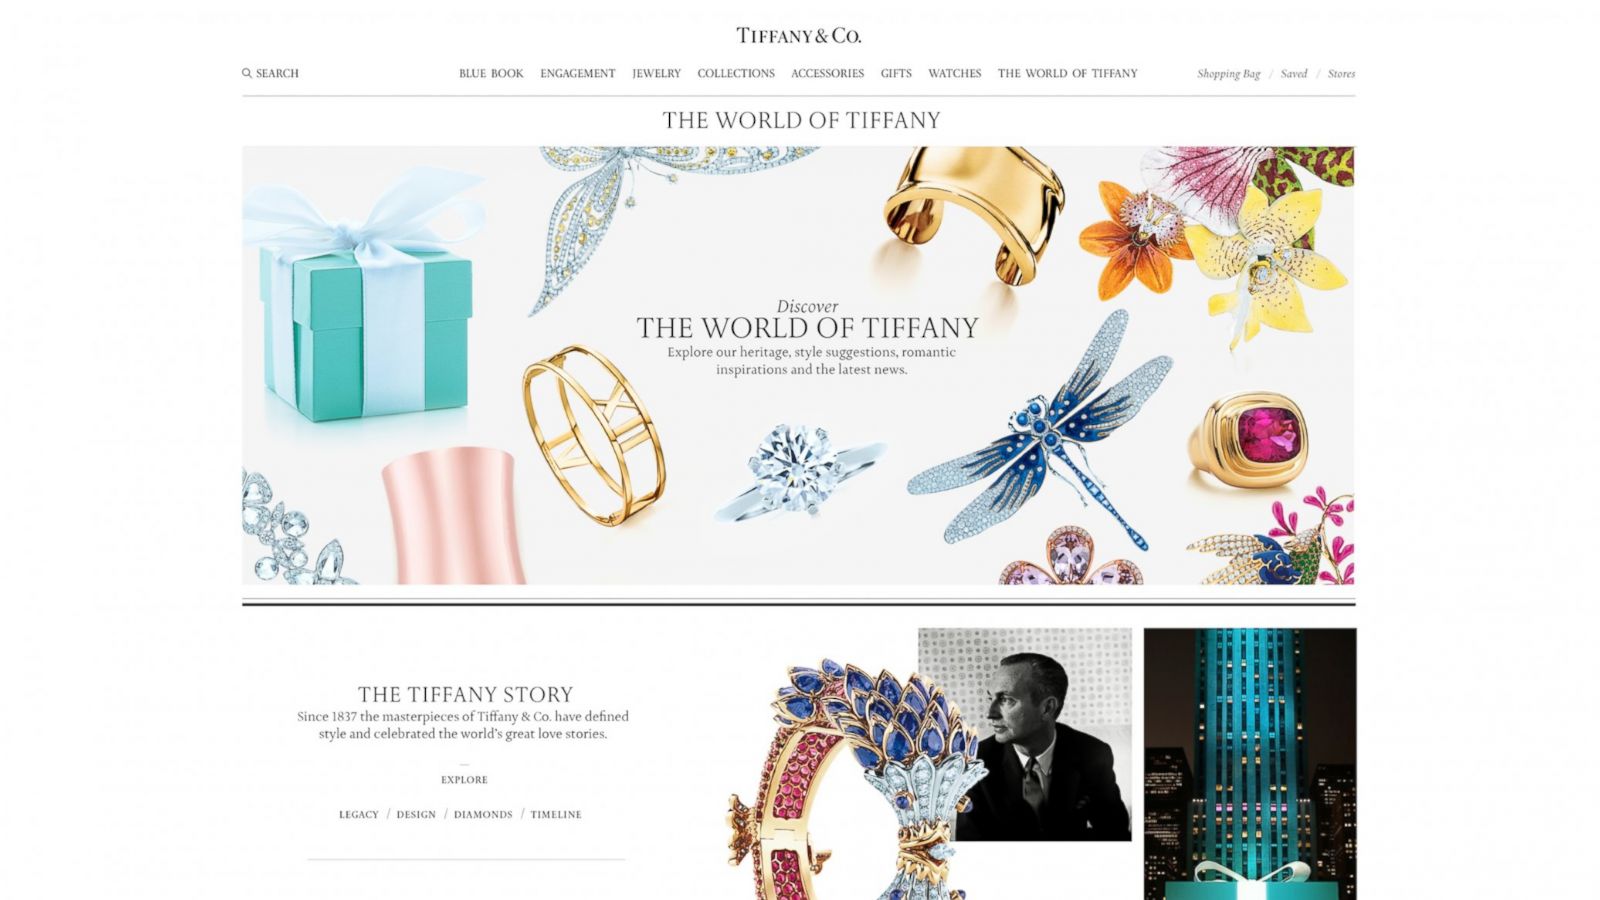 Tiffany & Co.: The Story Behind the Style